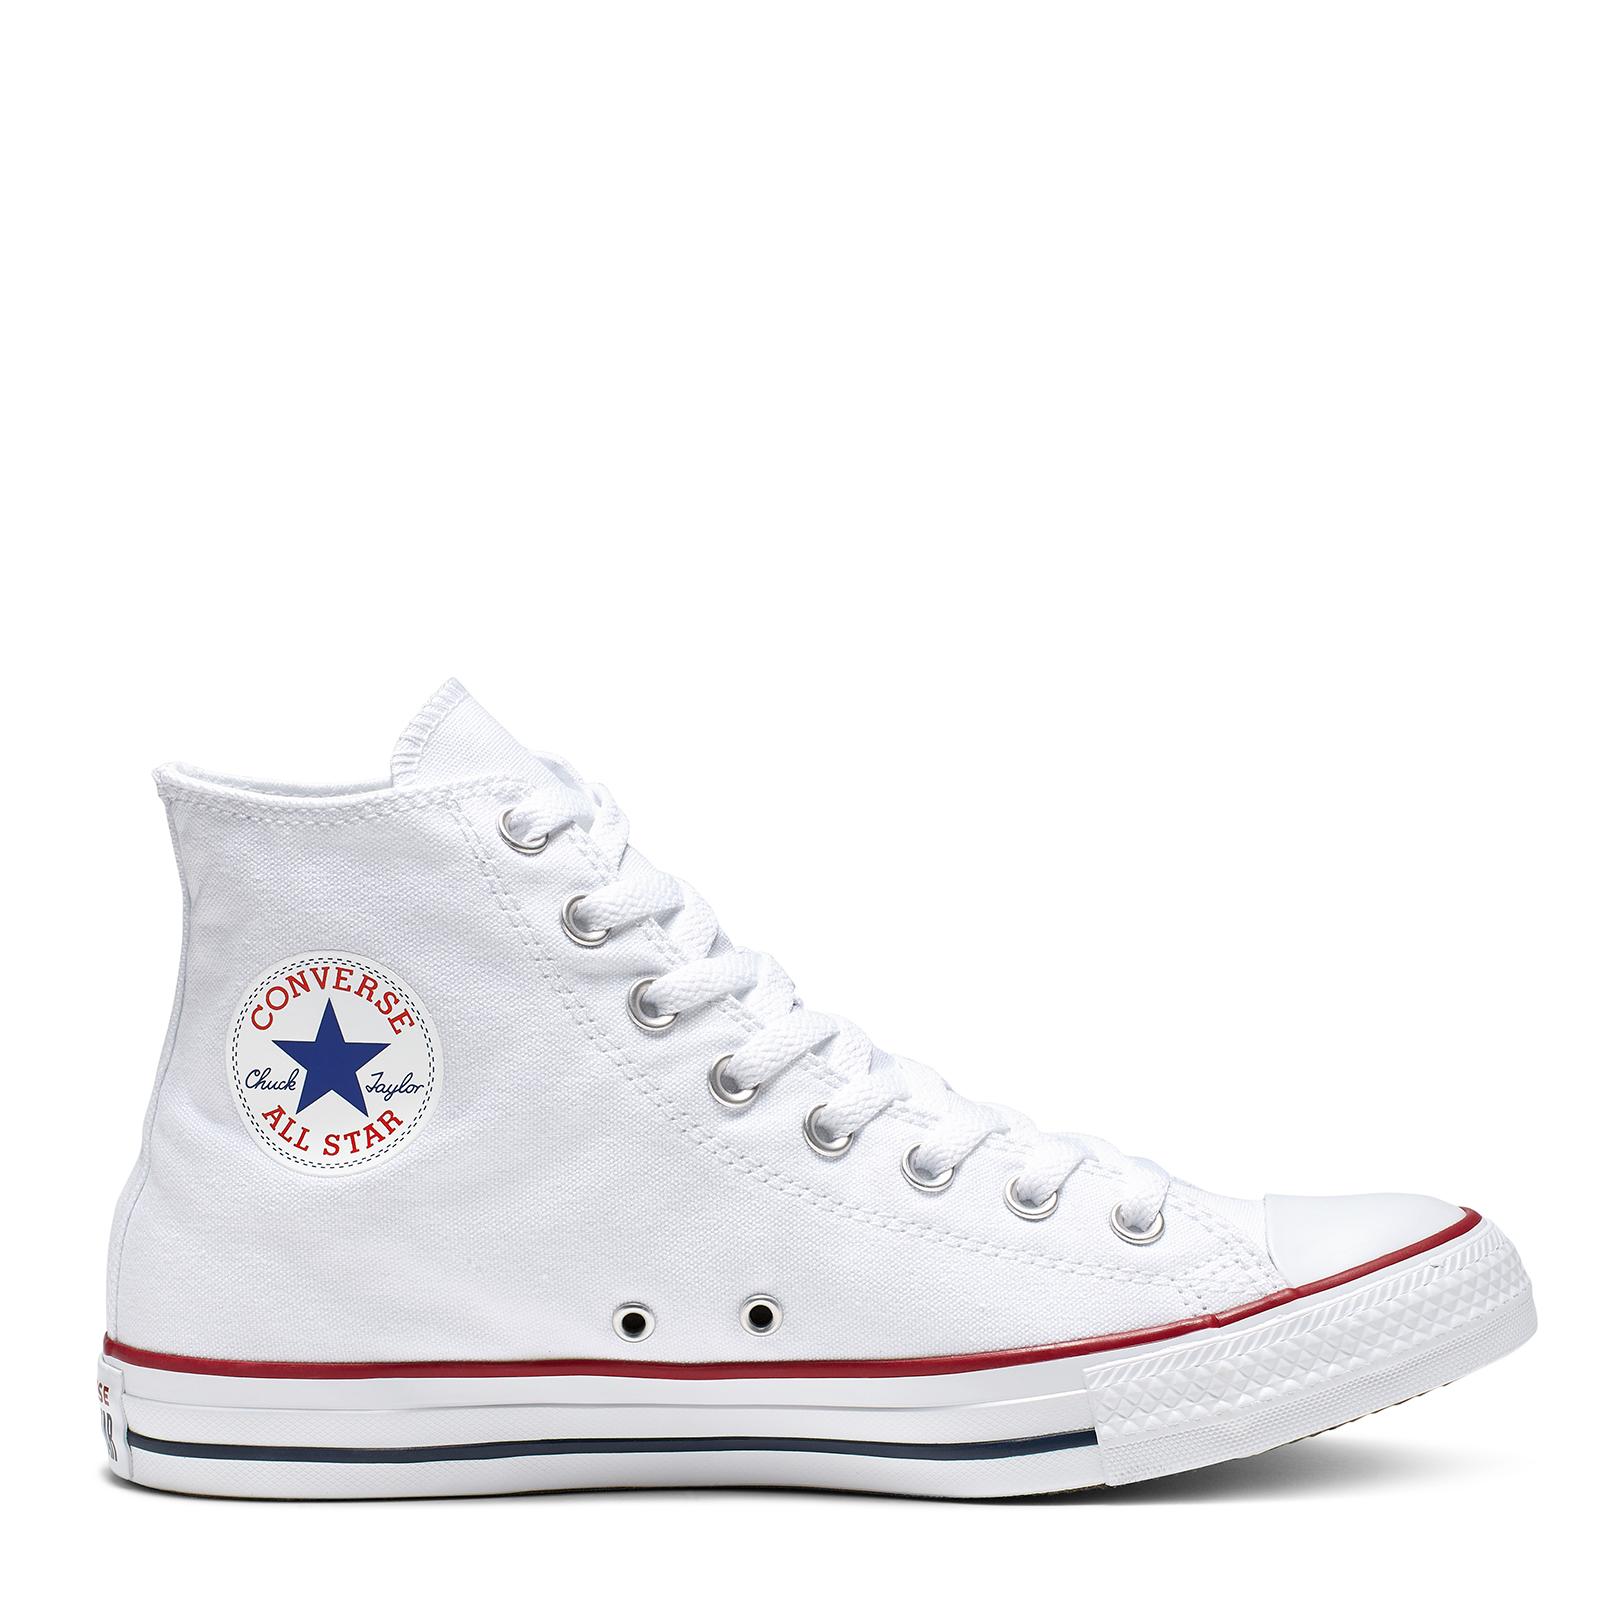 Cheap All Star Converse Wholesale Prices In South Africa. Full Details ...